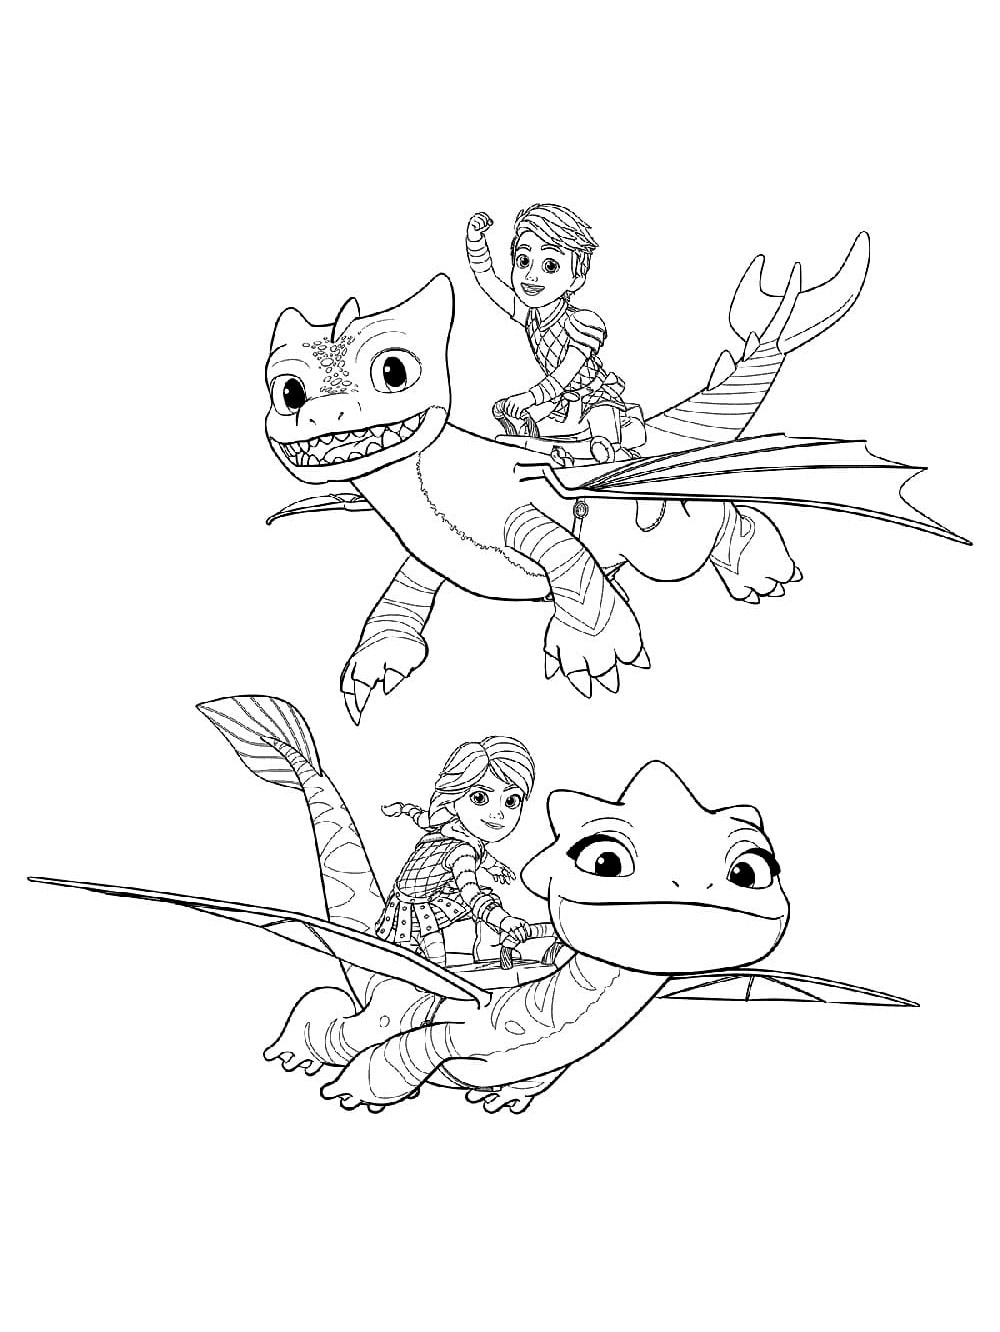 Dragons Rescue Riders coloring pages